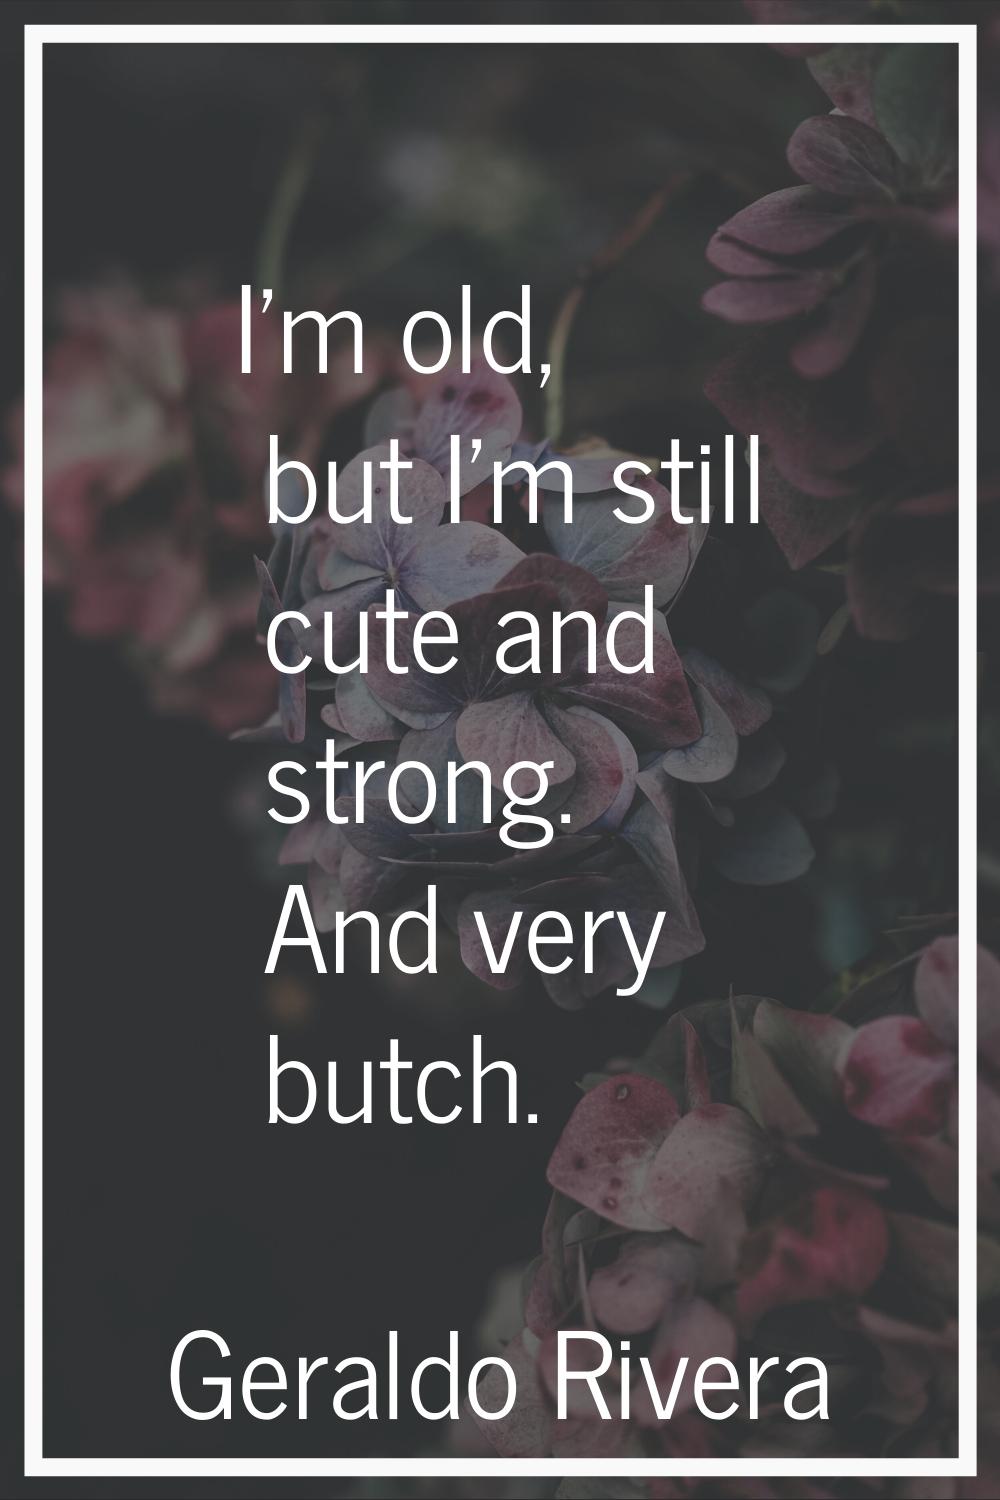 I'm old, but I'm still cute and strong. And very butch.